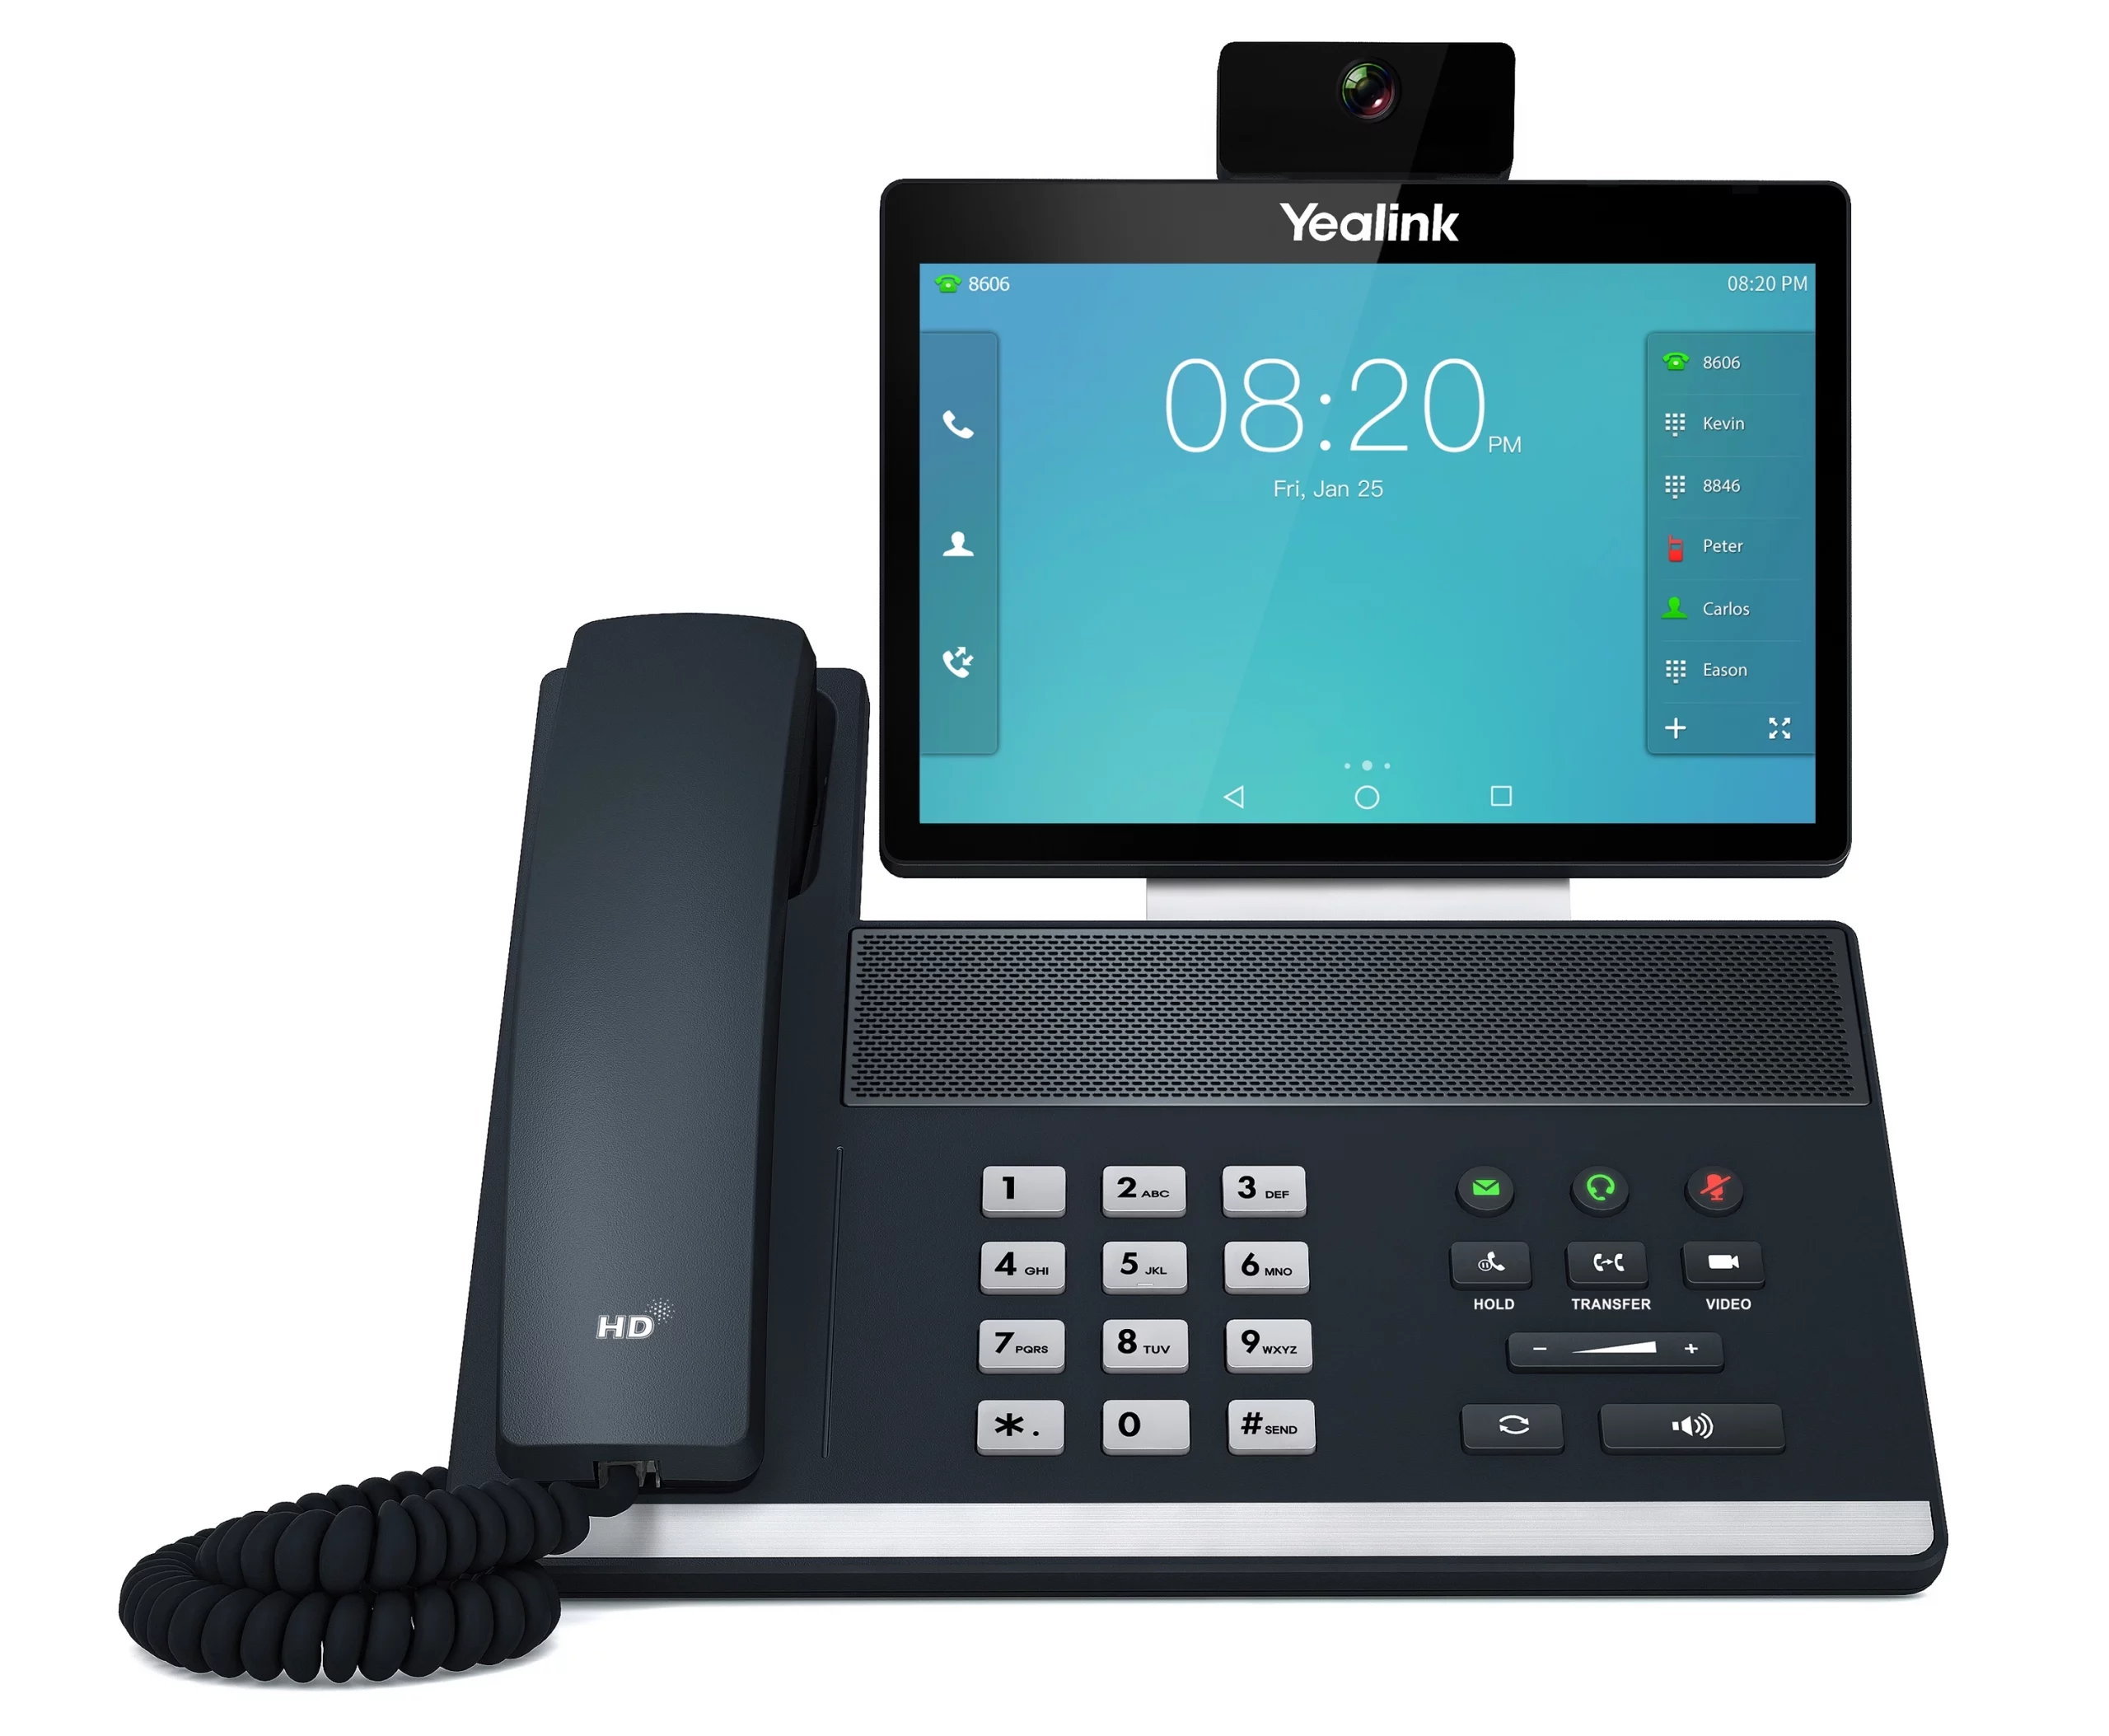 Yealink VP59 Smart Video IP Phone front scaled